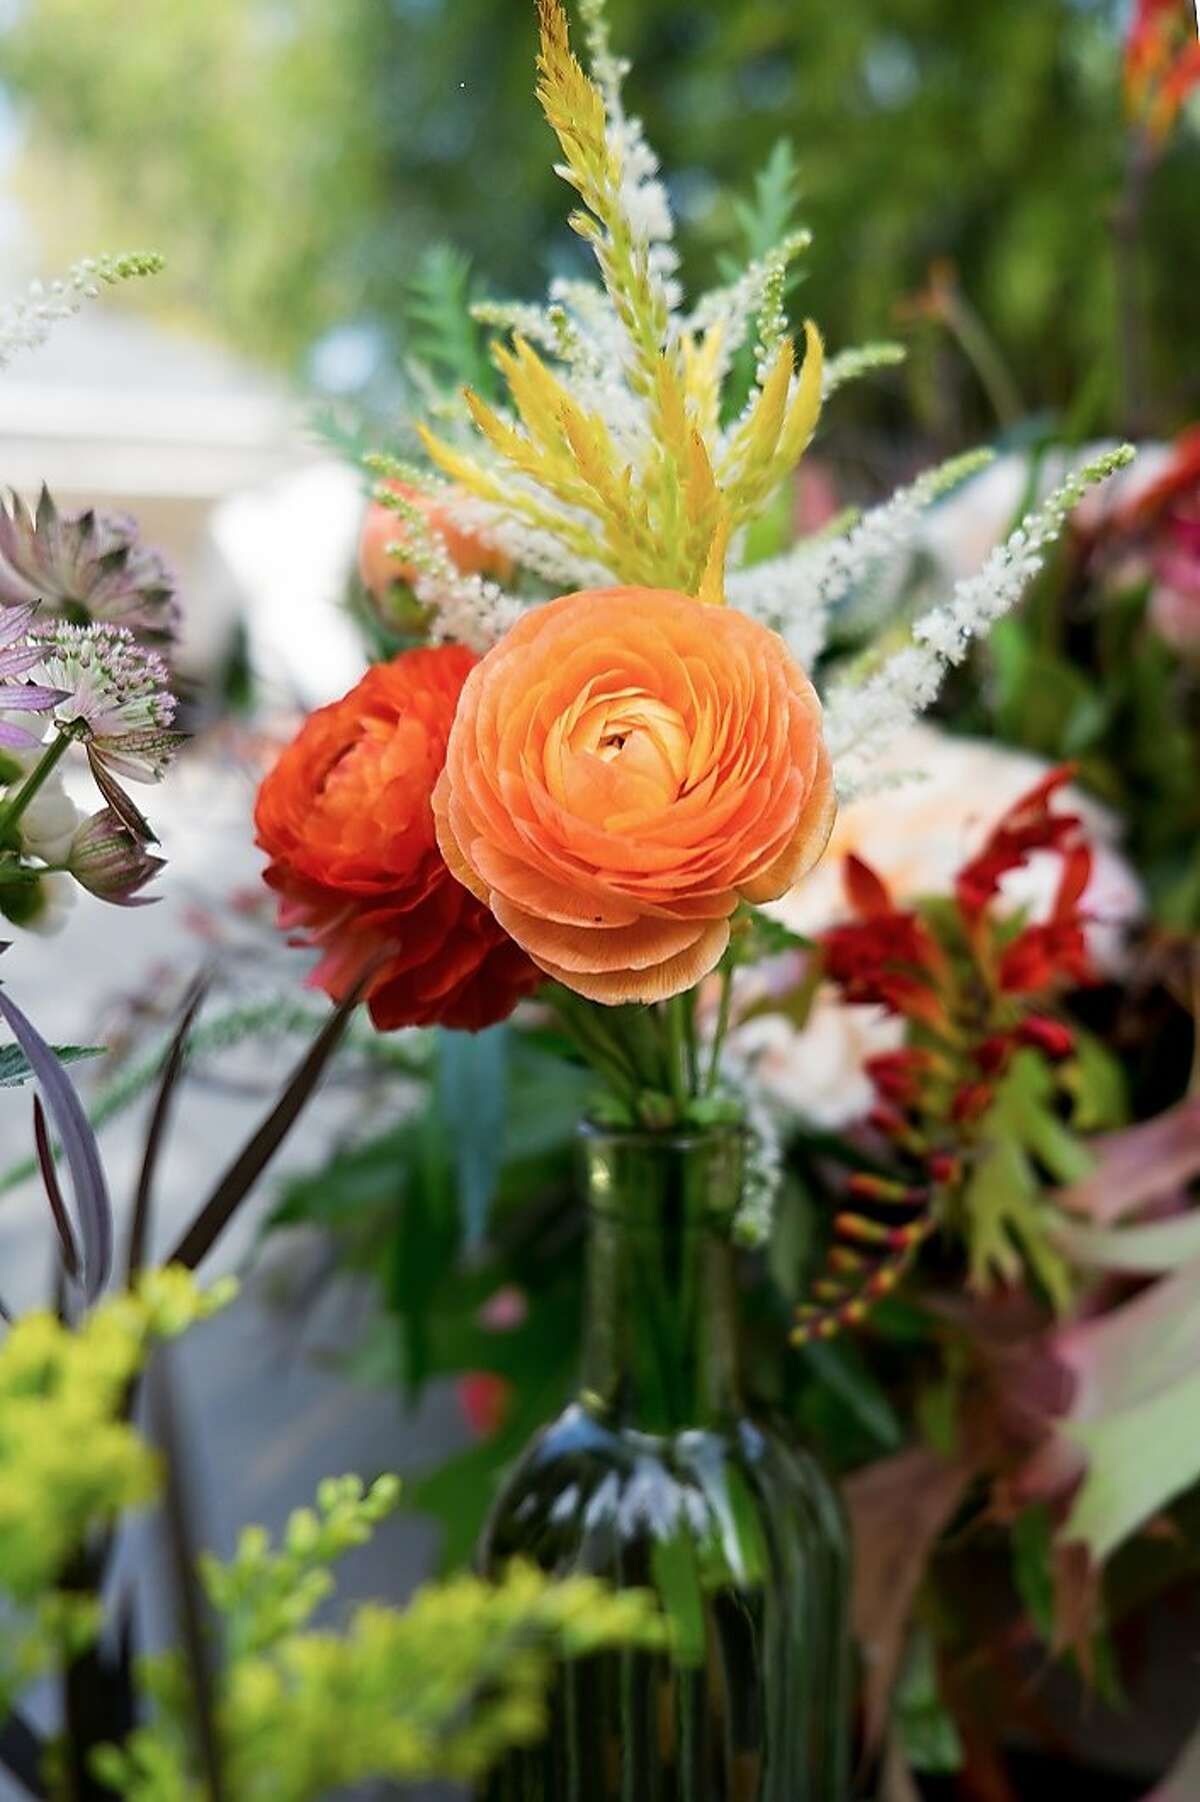 Dig into floral design with a class on the art of arranging presented by members of the McEvoy Ranch garden team. 9:30 a.m.-12:30 p.m. June 10. McEvoy Ranch, 5935 Red Hill Road, Petaluma.